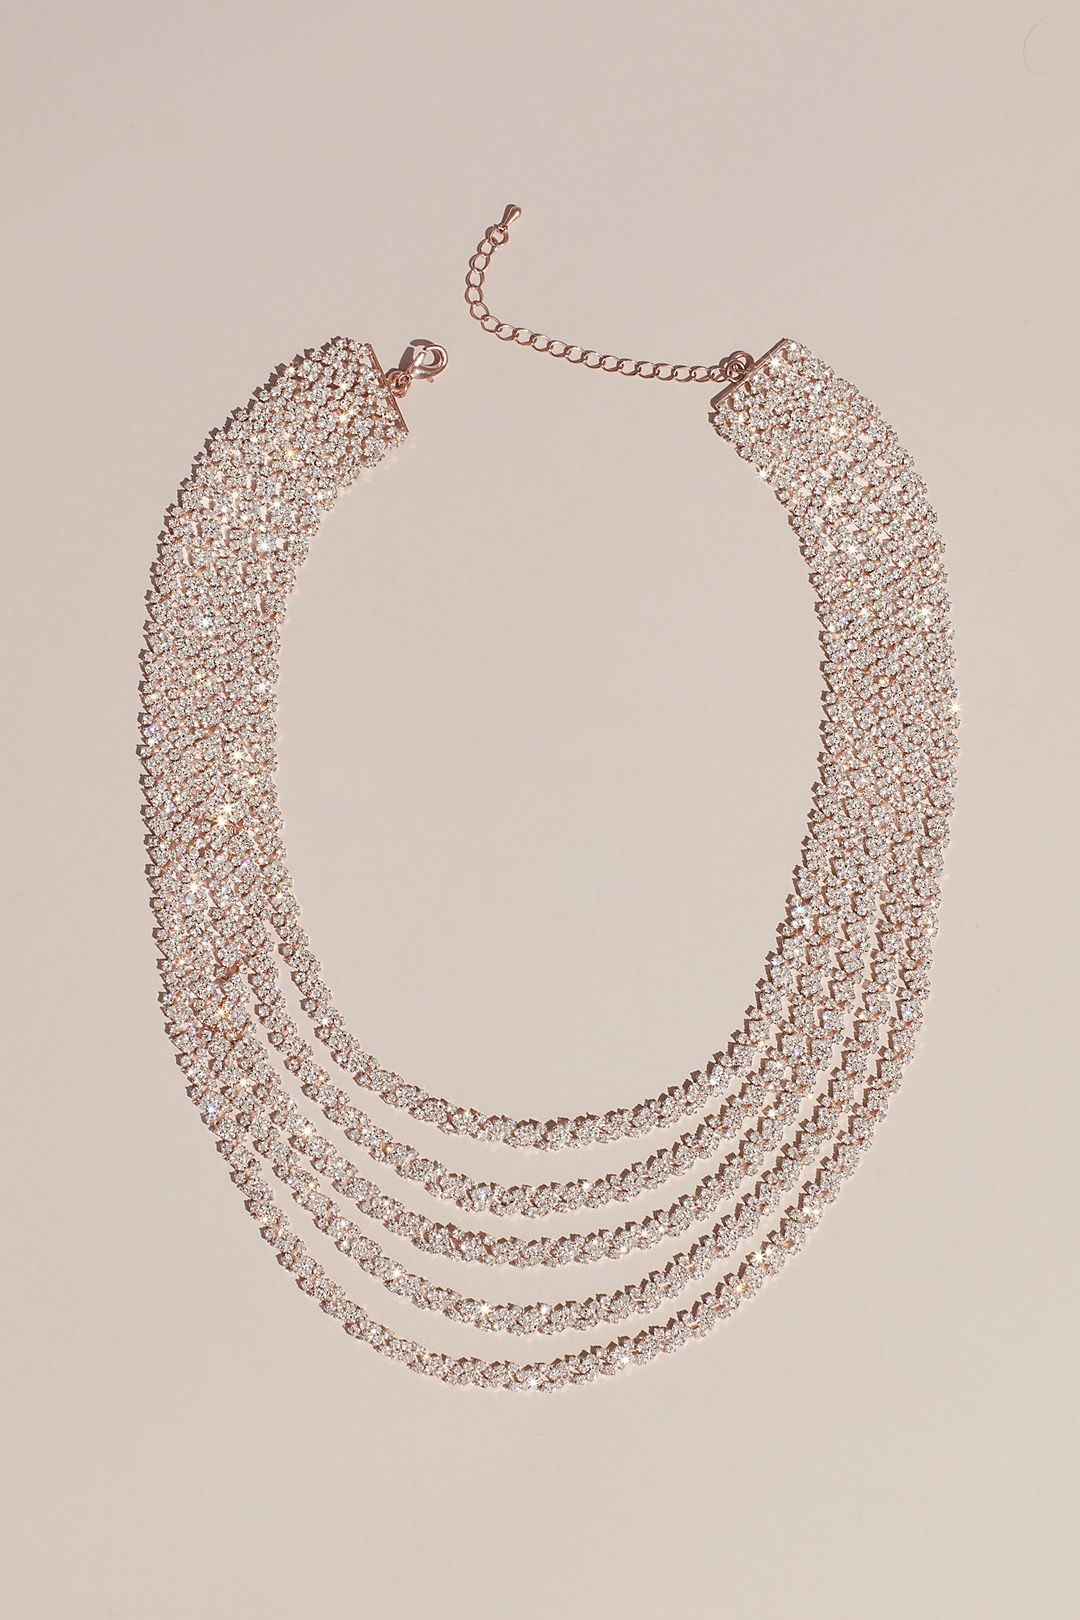 Dangling Crystal Chains Layered Necklace Image 3